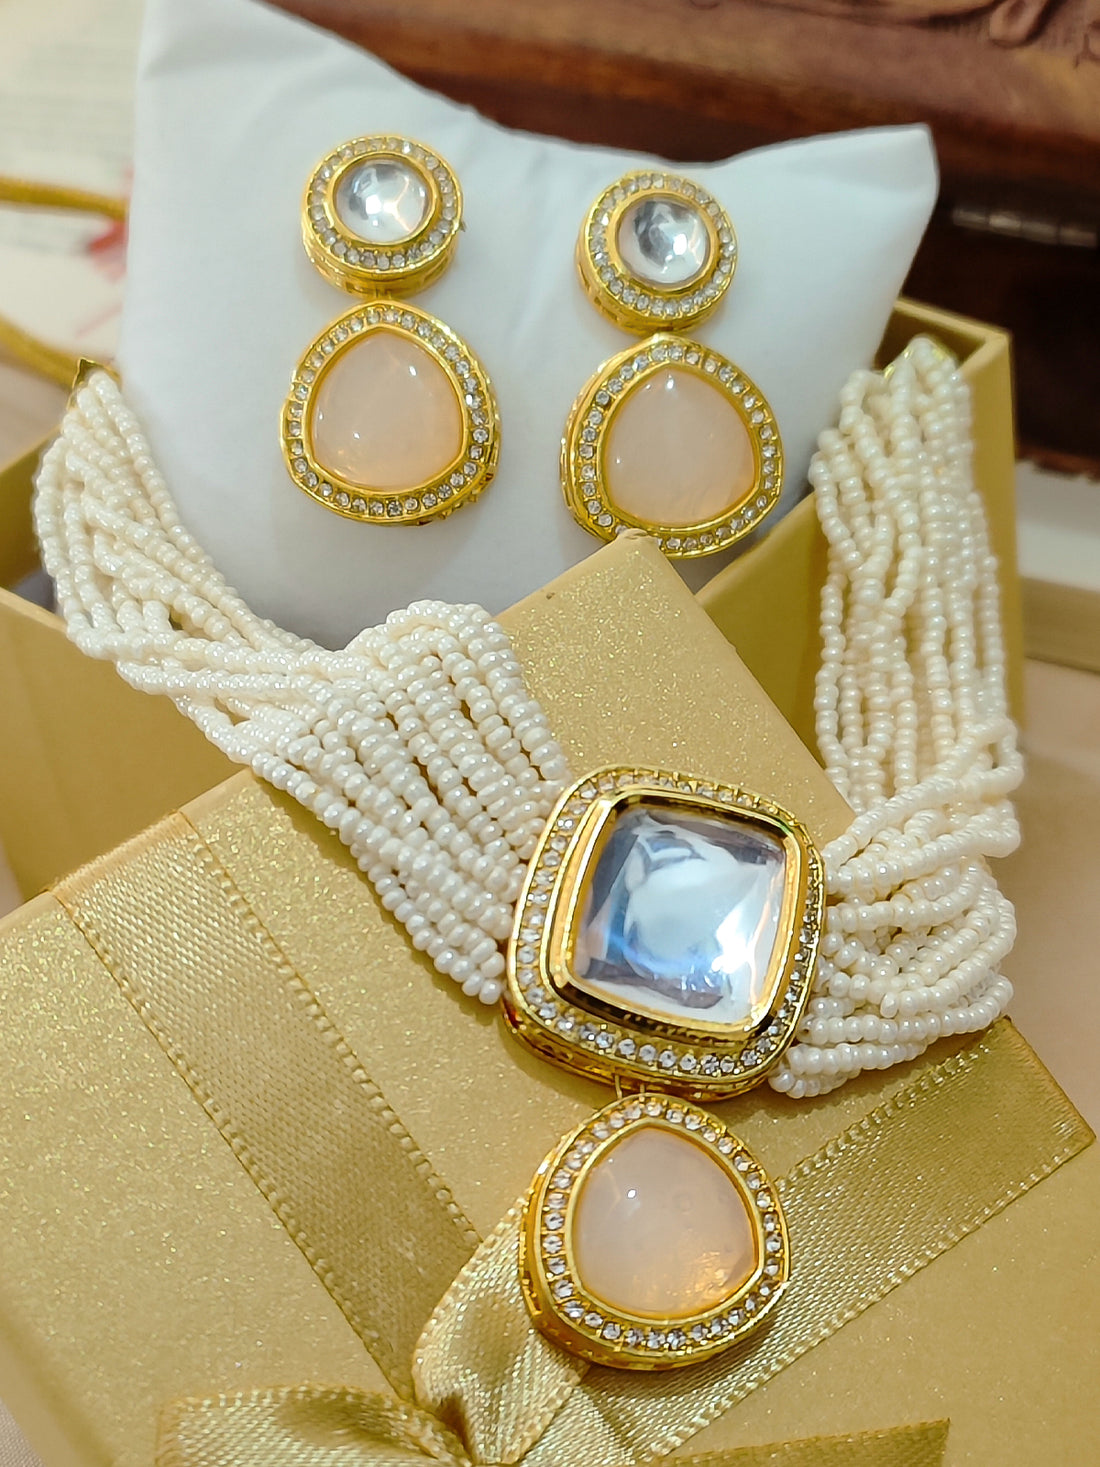 Apaarth Polki Necklace Set | Choker Neckless Set | Off-White Artificial Pearls Band | Best for Weddings, Festivals & Gifting from the house of Mrigaya by Nandini- Gold Finish with Beige Stone - Mrigaya India